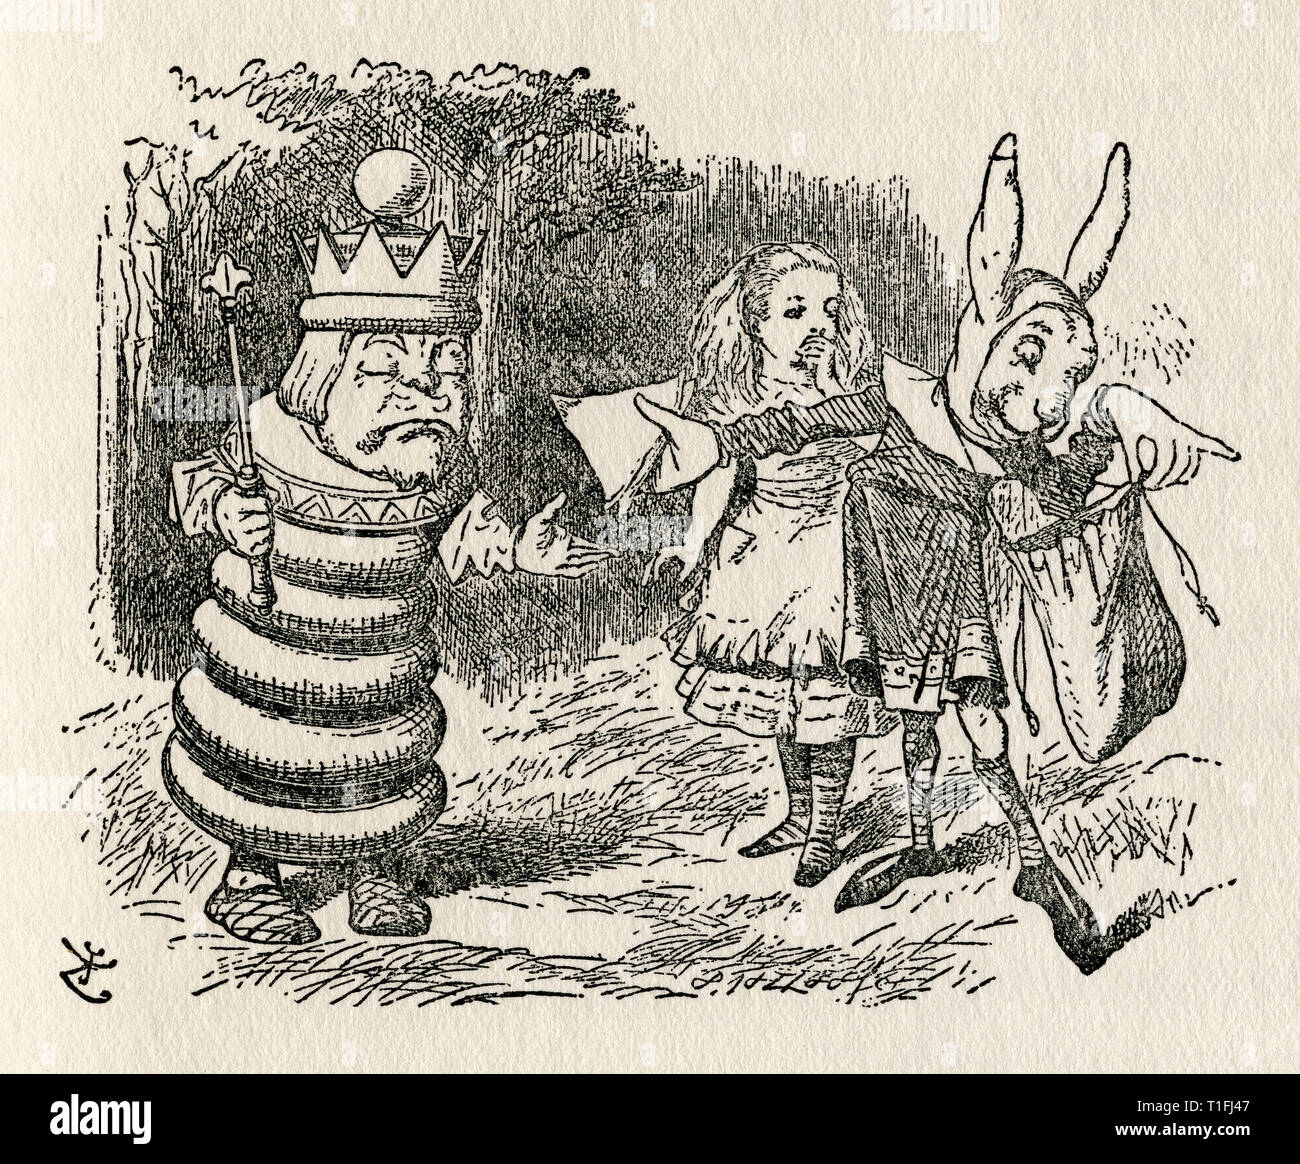 Alice with the White King and Haigha.  Illustration by Sir John Tenniel, (1820 - 1914).  From the book Through the Looking Glass and What Alice Found There, by Lewis Carroll, published London, 1912. Stock Photo